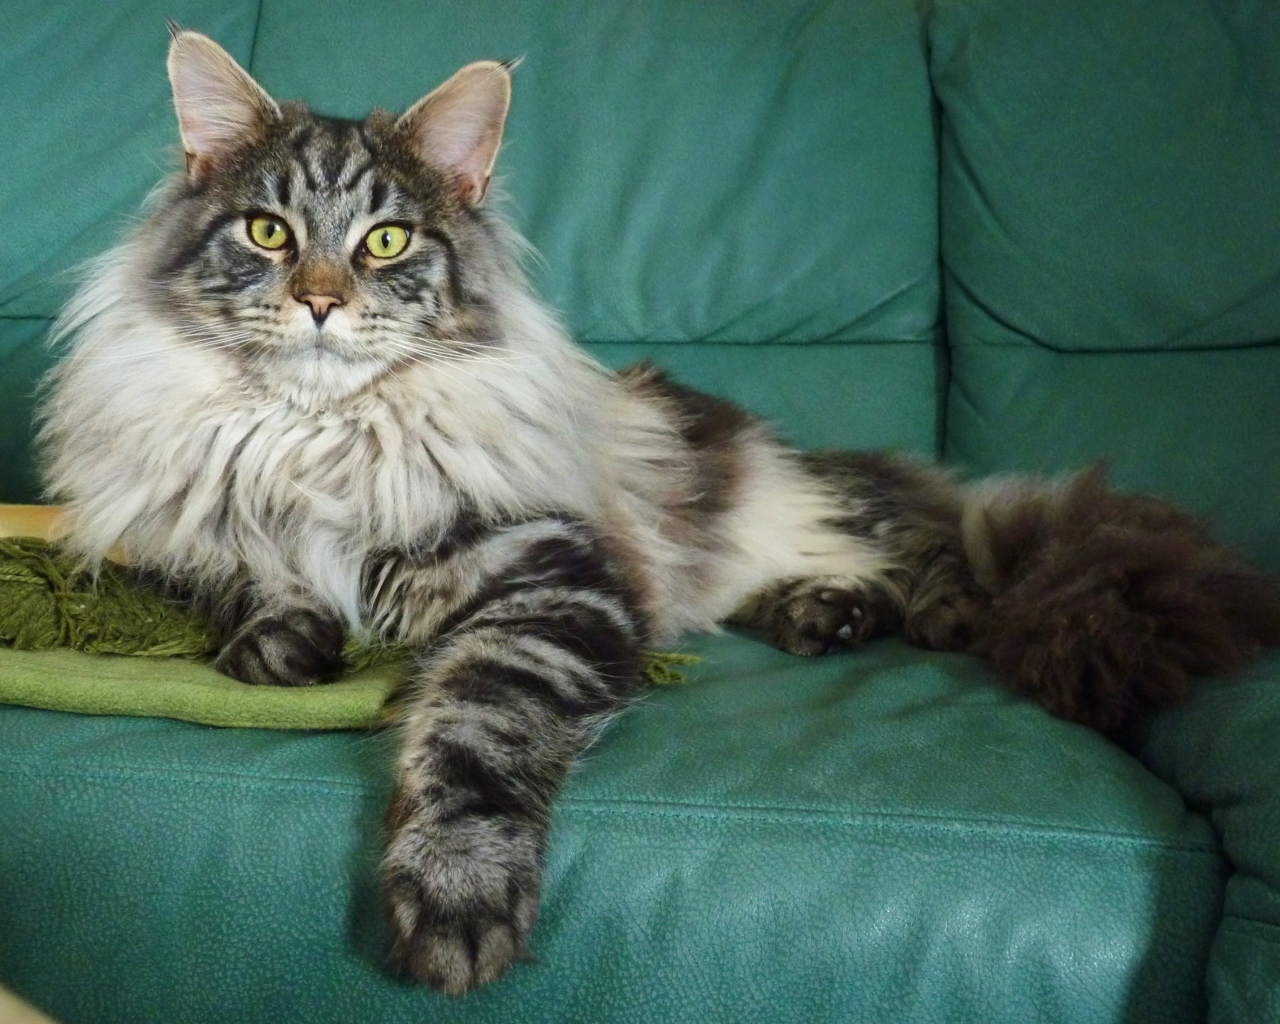 Beautiful silver Maine Coon cat on a sofa